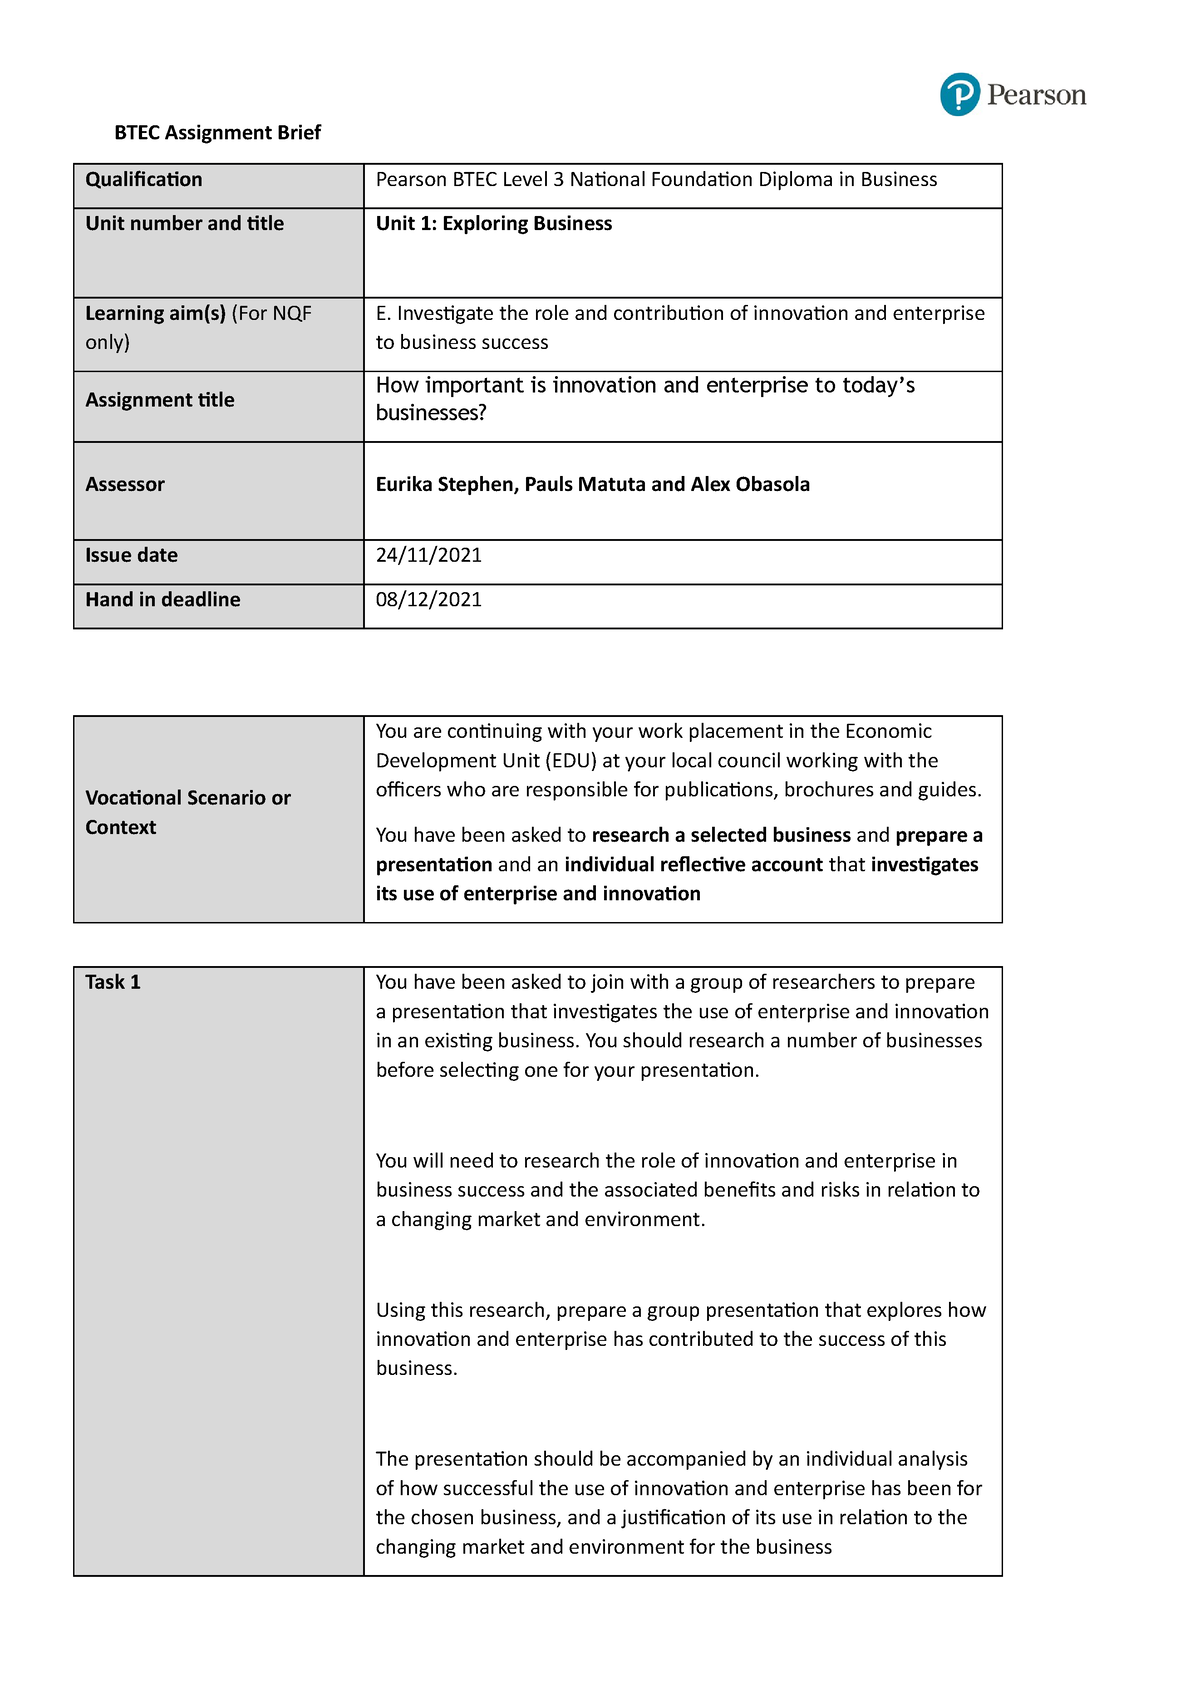 btec pearson set assignment